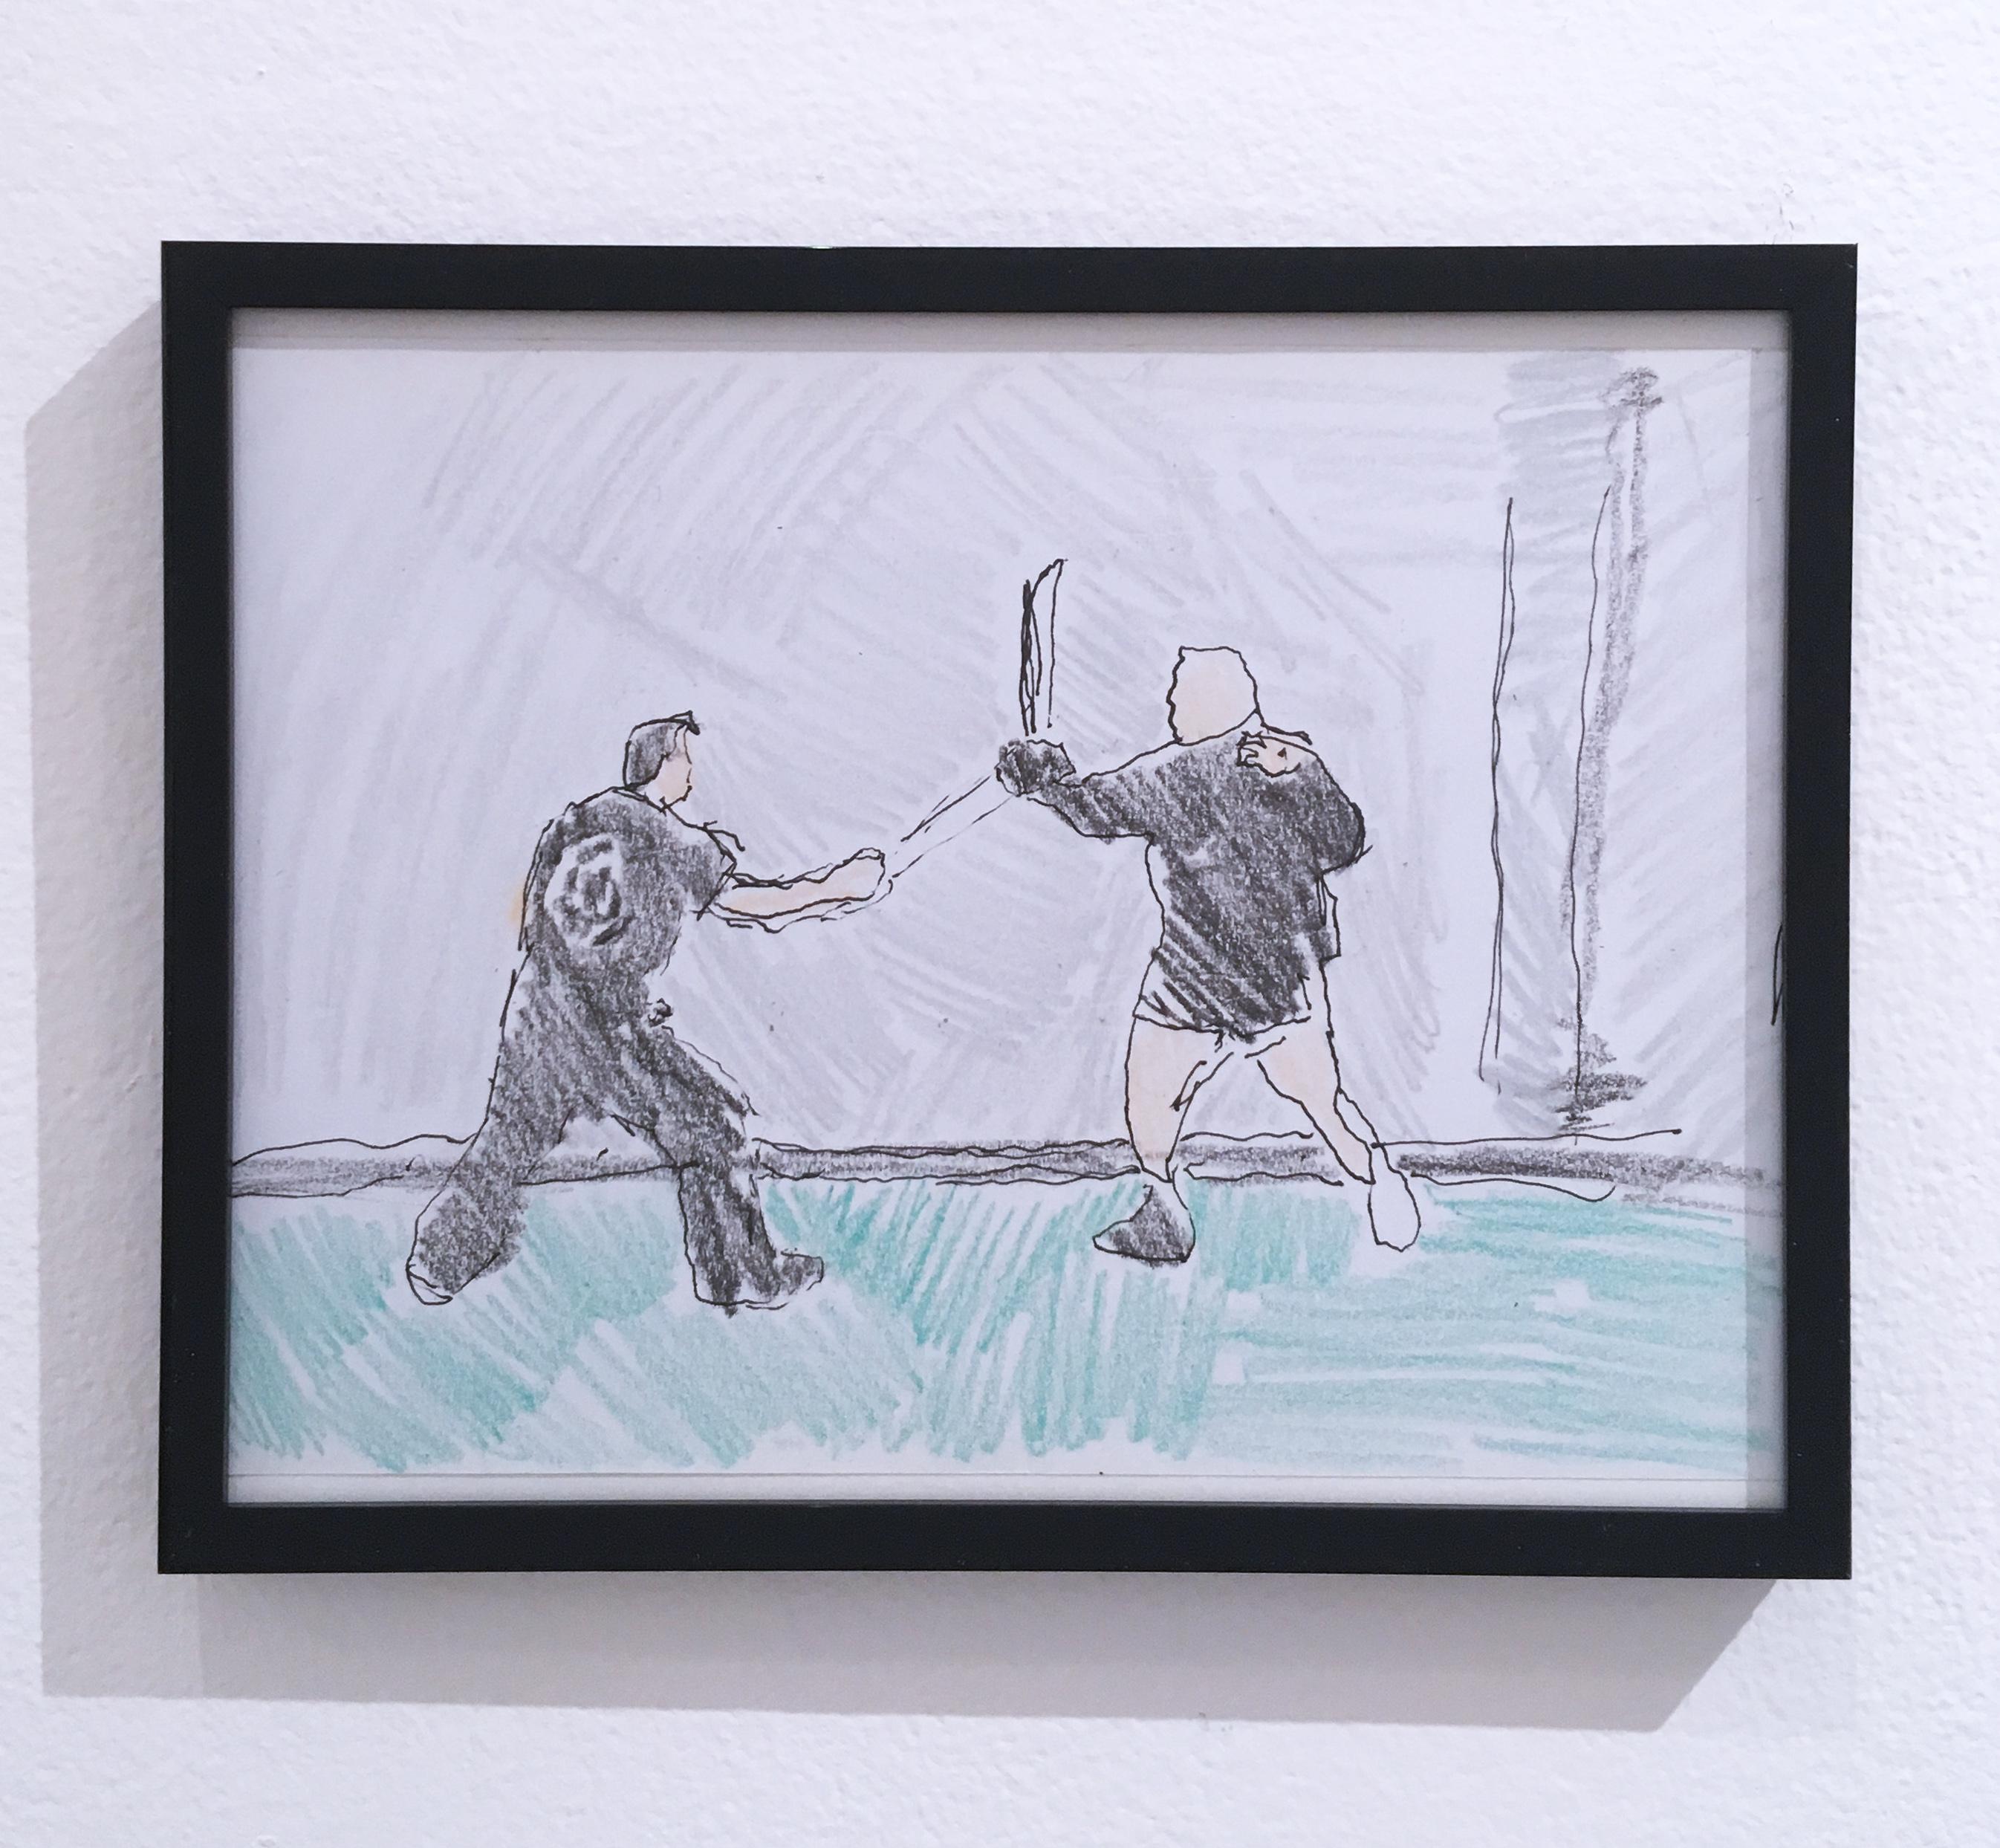 Sword Fight, 2018, pen and crayon on paper, figurative, drawing, framed